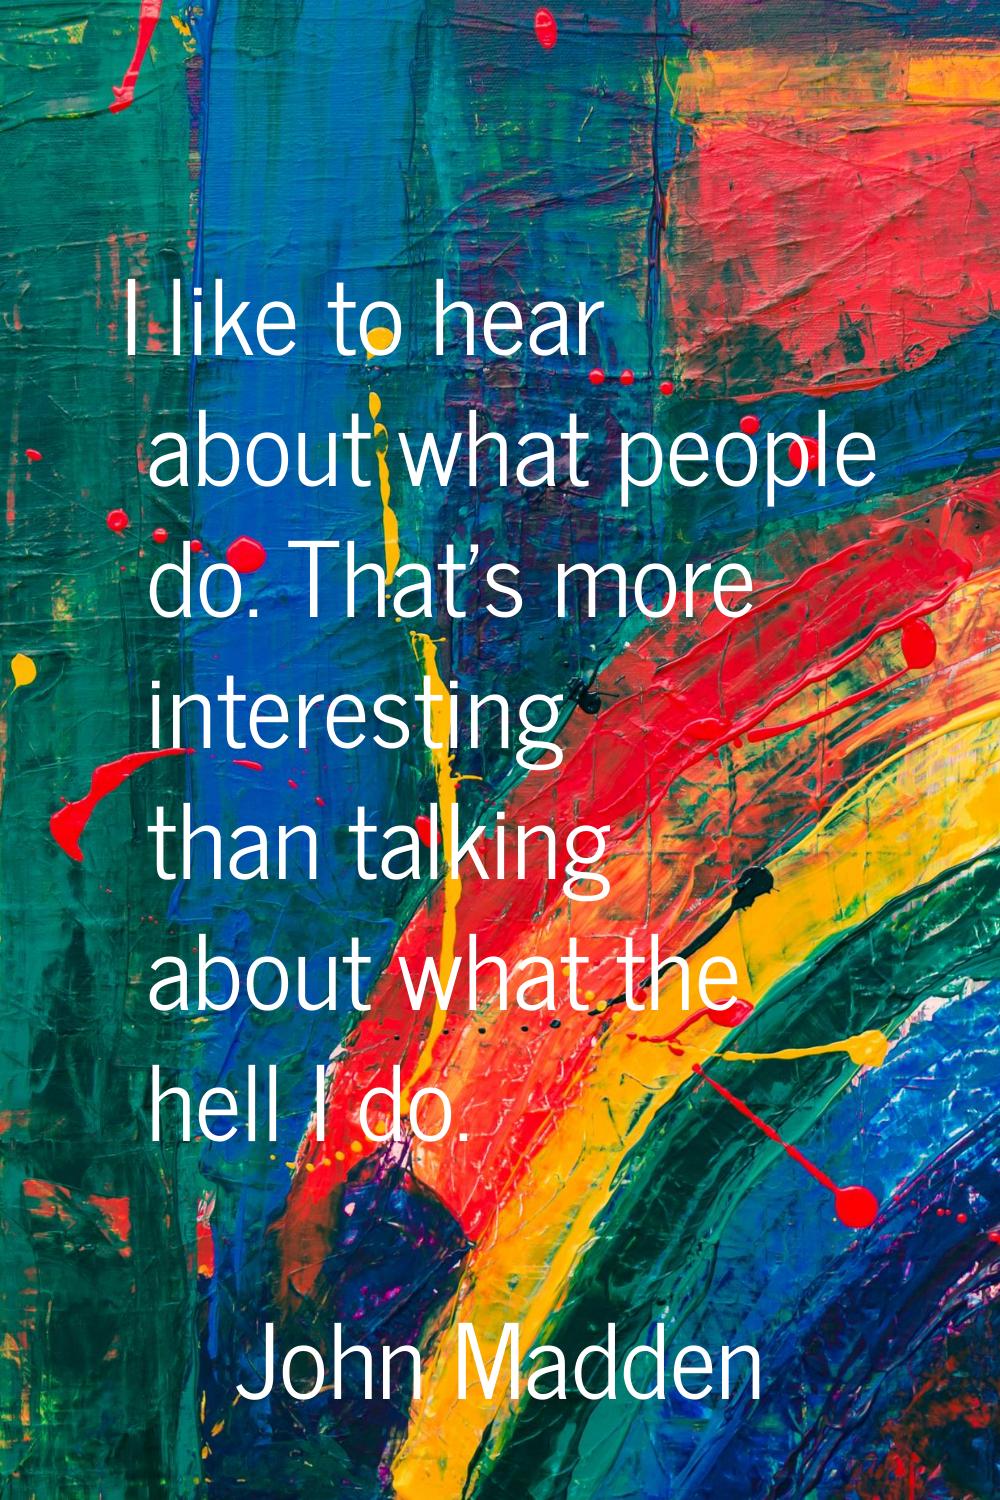 I like to hear about what people do. That's more interesting than talking about what the hell I do.